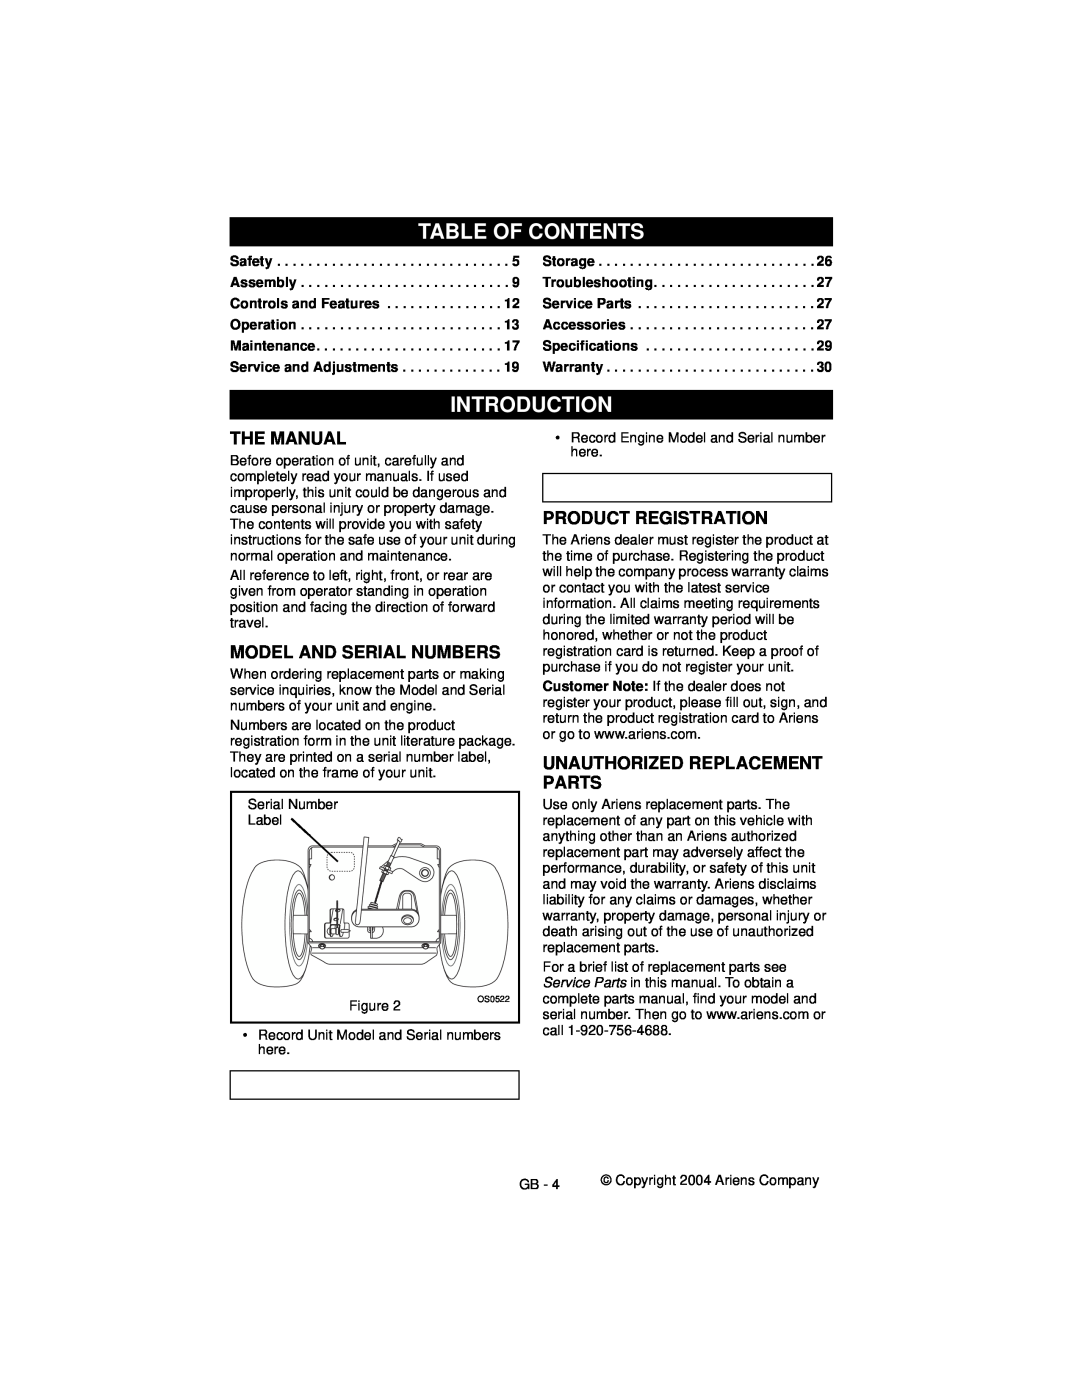 Ariens 932505 - 724 manual Table Of Contents, Introduction, The Manual, Model And Serial Numbers, Product Registration 